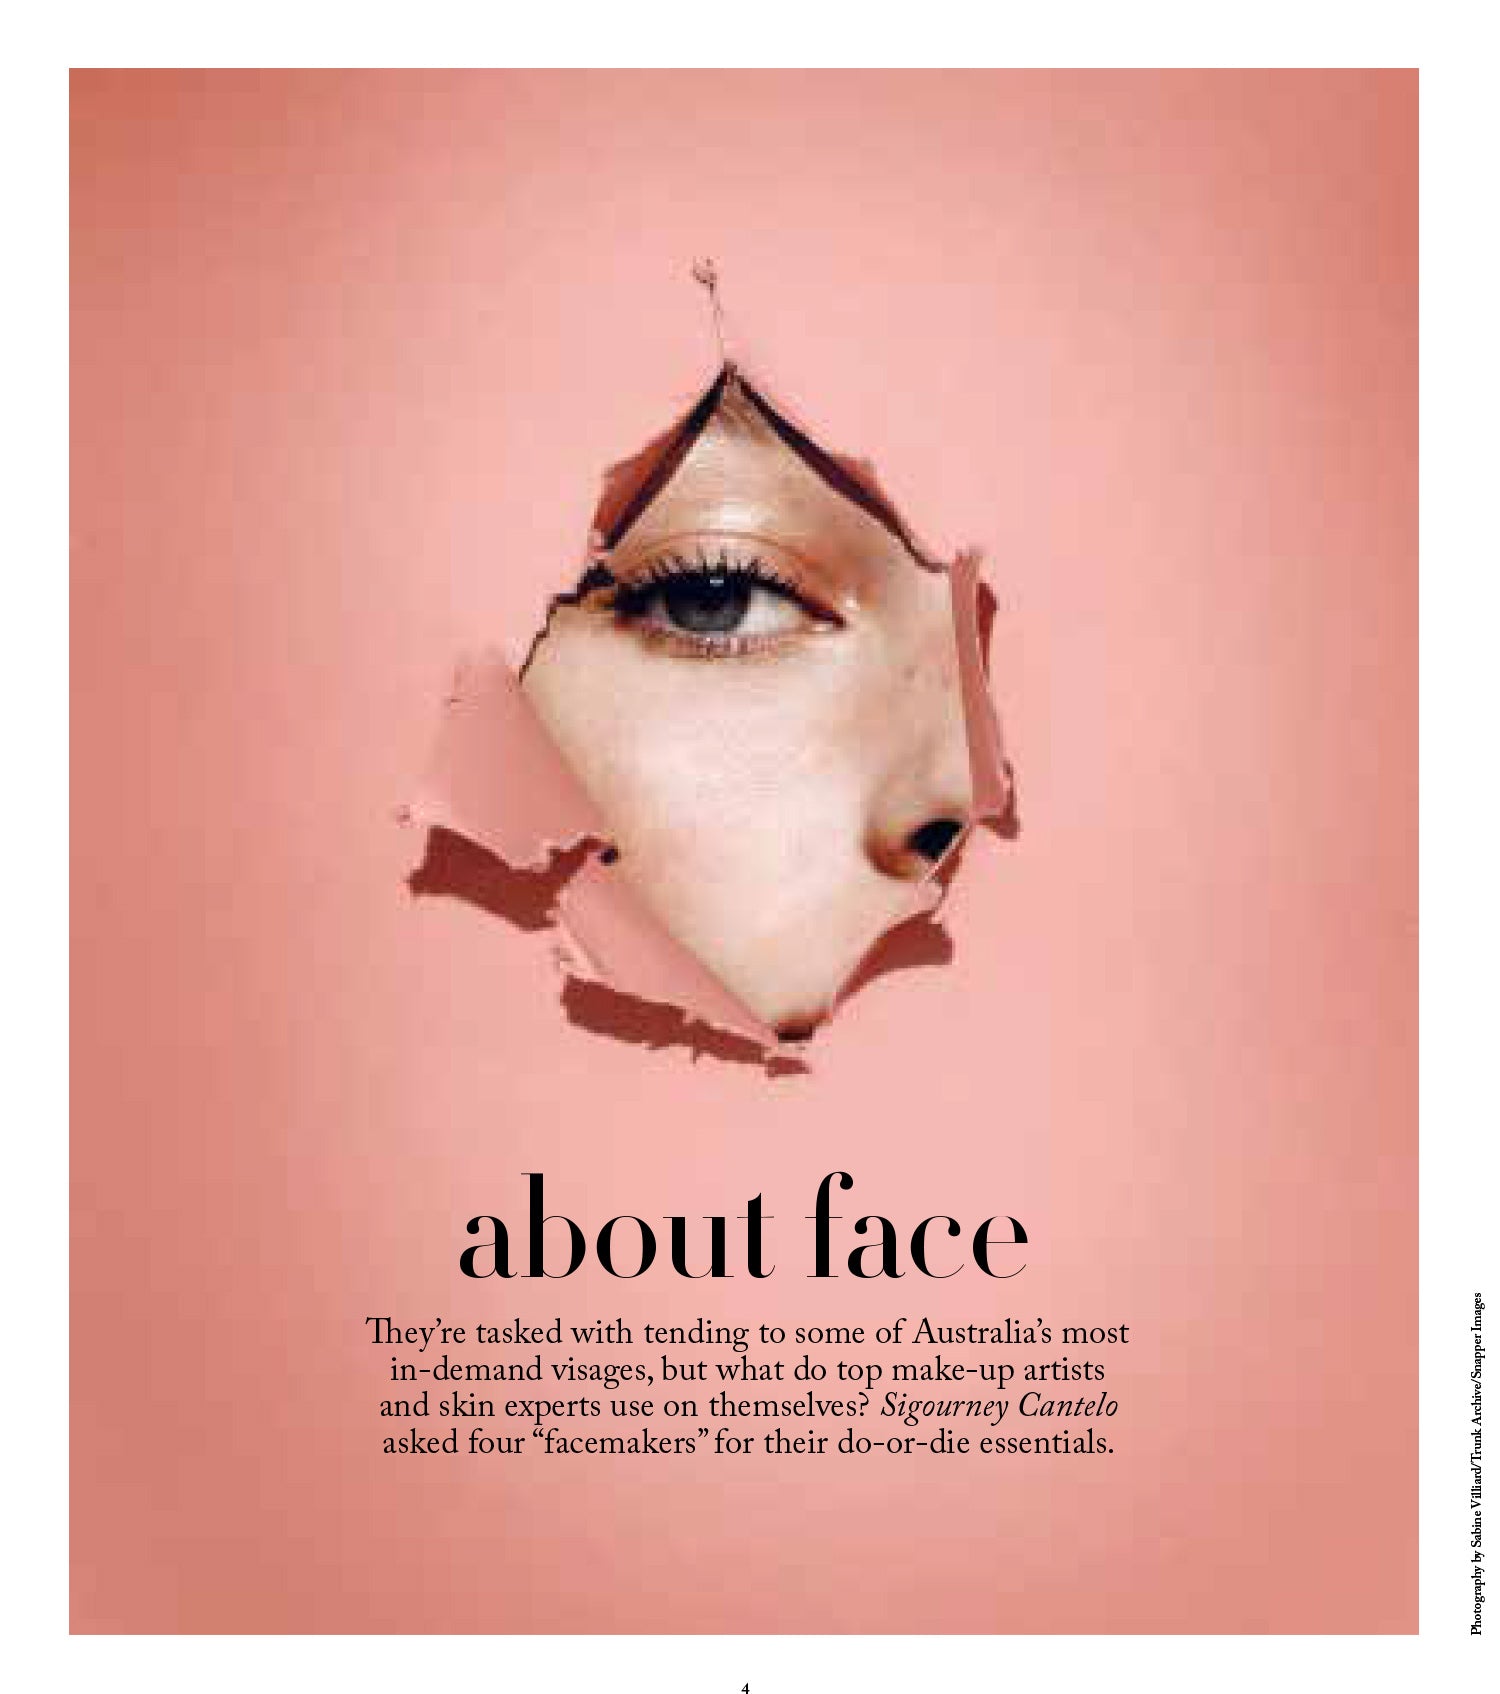 jocelyn petroni in sunday life about face